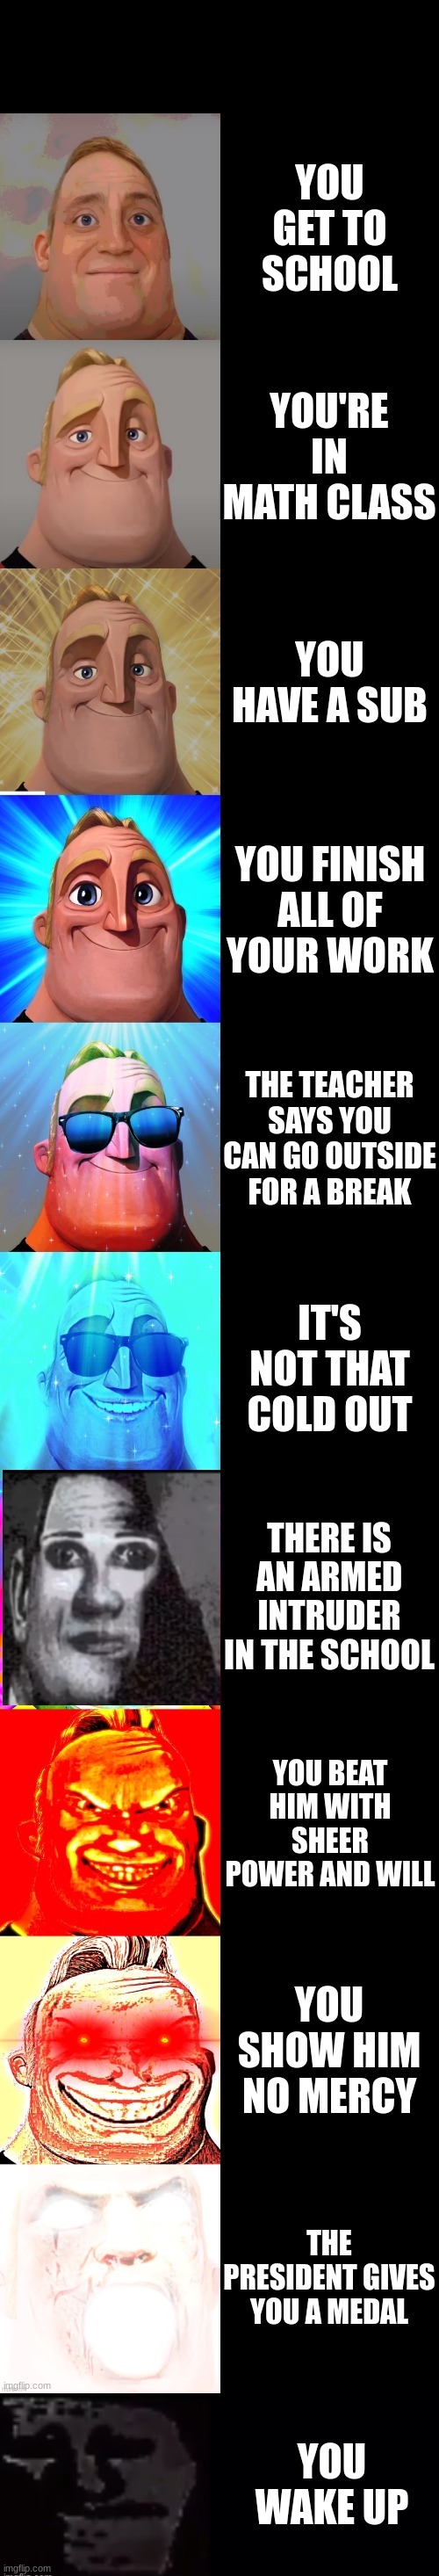 School meme | YOU GET TO SCHOOL; YOU'RE IN MATH CLASS; YOU HAVE A SUB; YOU FINISH ALL OF YOUR WORK; THE TEACHER SAYS YOU CAN GO OUTSIDE FOR A BREAK; IT'S NOT THAT COLD OUT; THERE IS AN ARMED INTRUDER IN THE SCHOOL; YOU BEAT HIM WITH SHEER POWER AND WILL; YOU SHOW HIM NO MERCY; THE PRESIDENT GIVES YOU A MEDAL; YOU WAKE UP | image tagged in mr incredible becoming canny,mr incredible becoming uncanny | made w/ Imgflip meme maker